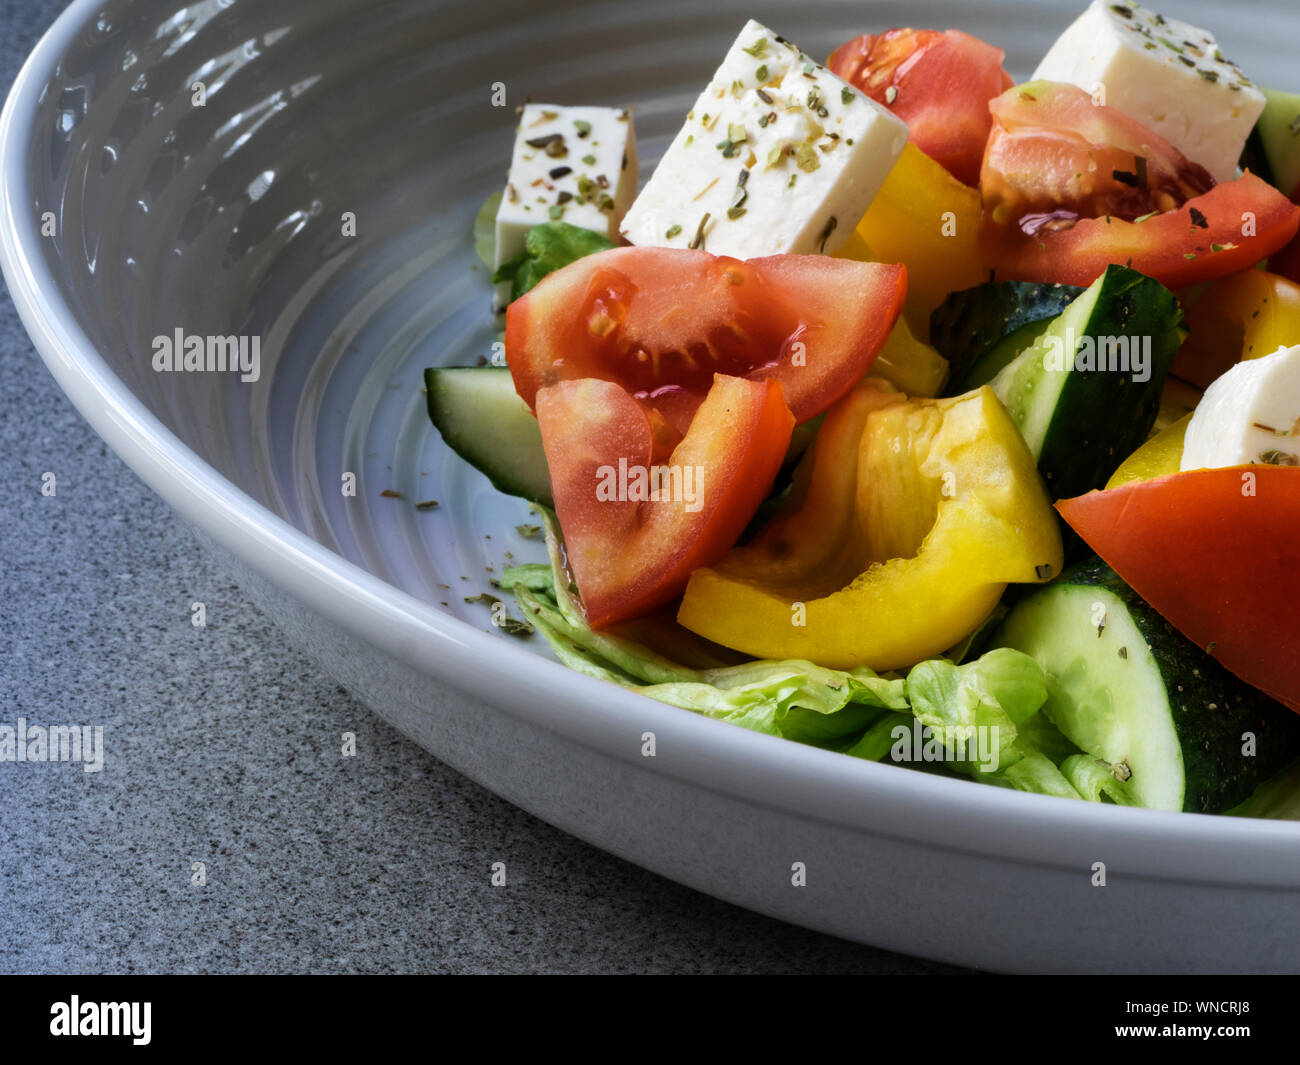 Close-up Of Fresh Food In Bowl On Table Stock Photo